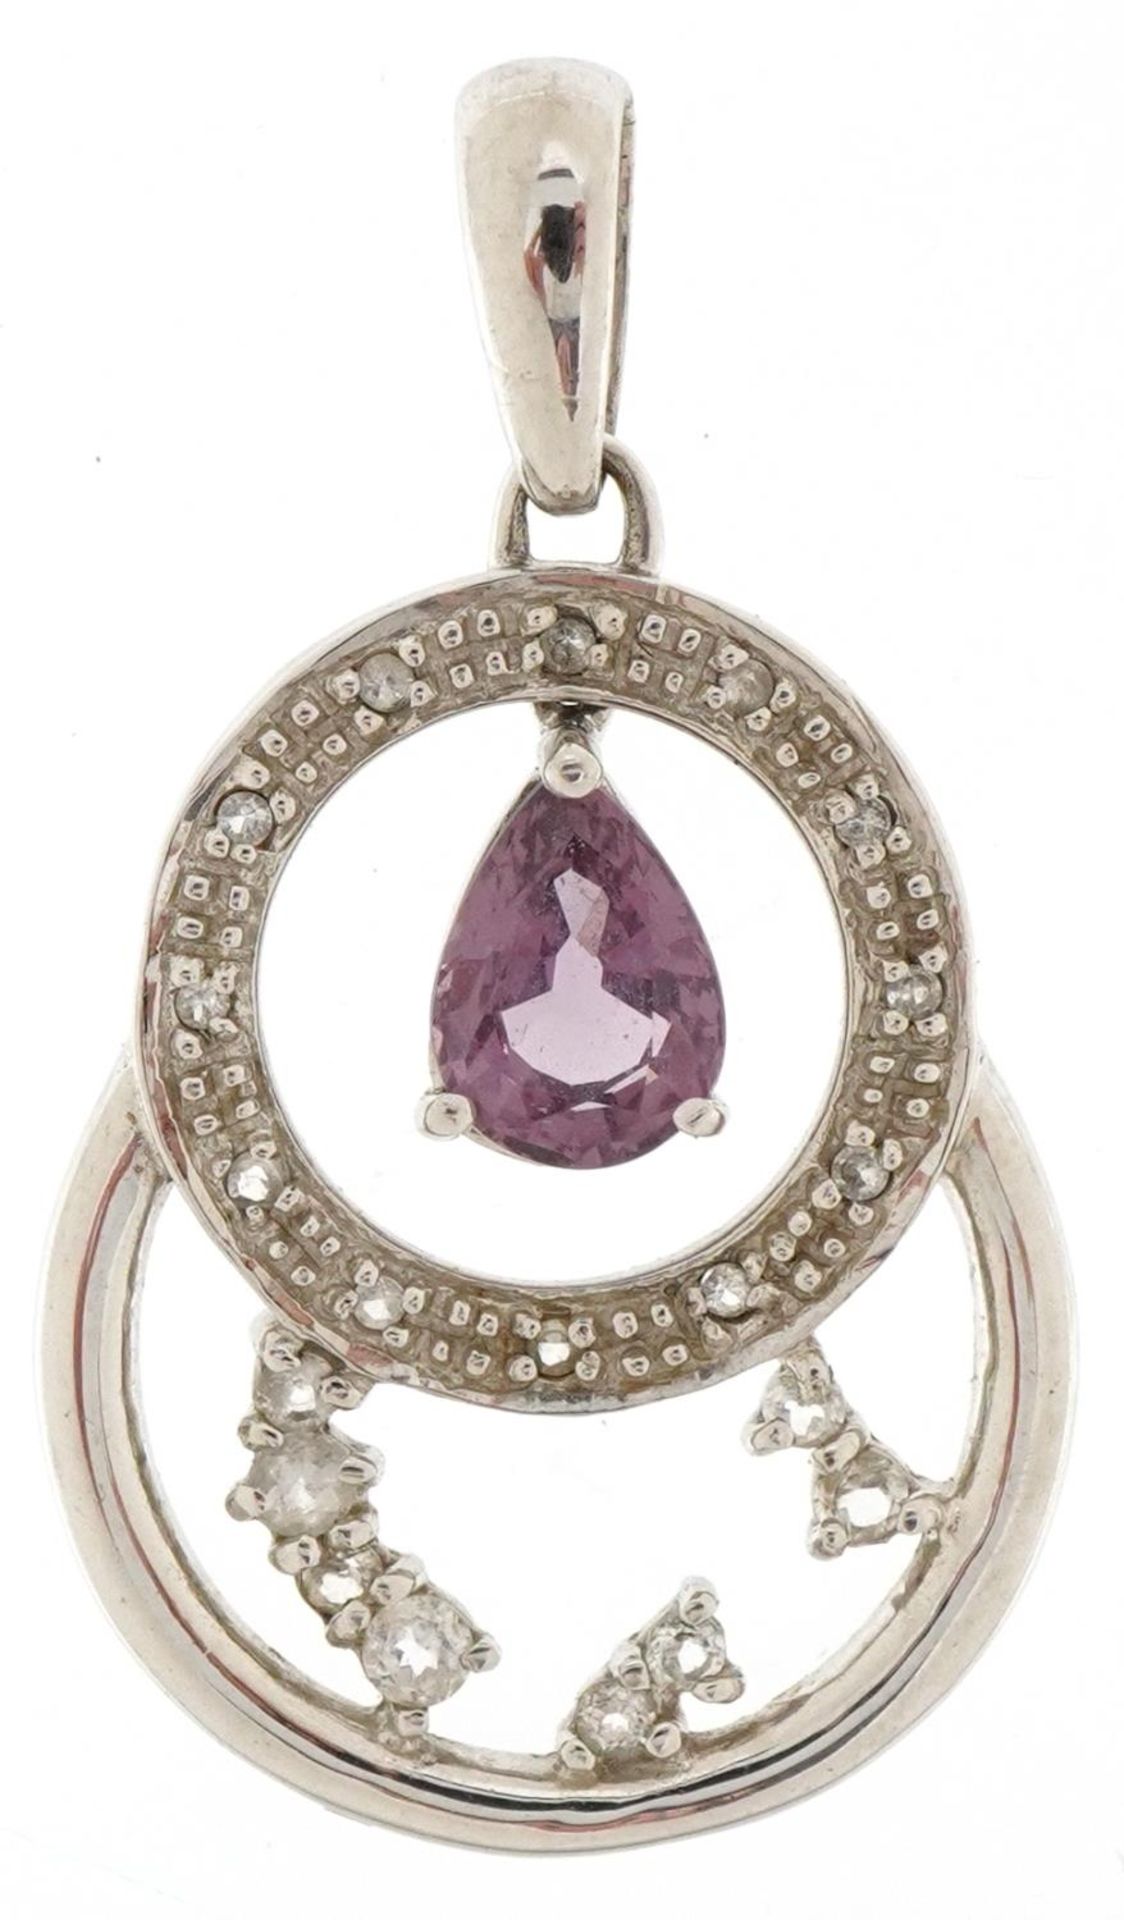 9ct white gold purple spinel, diamond and clear stone pendant, 3.4cm high, 3.7g